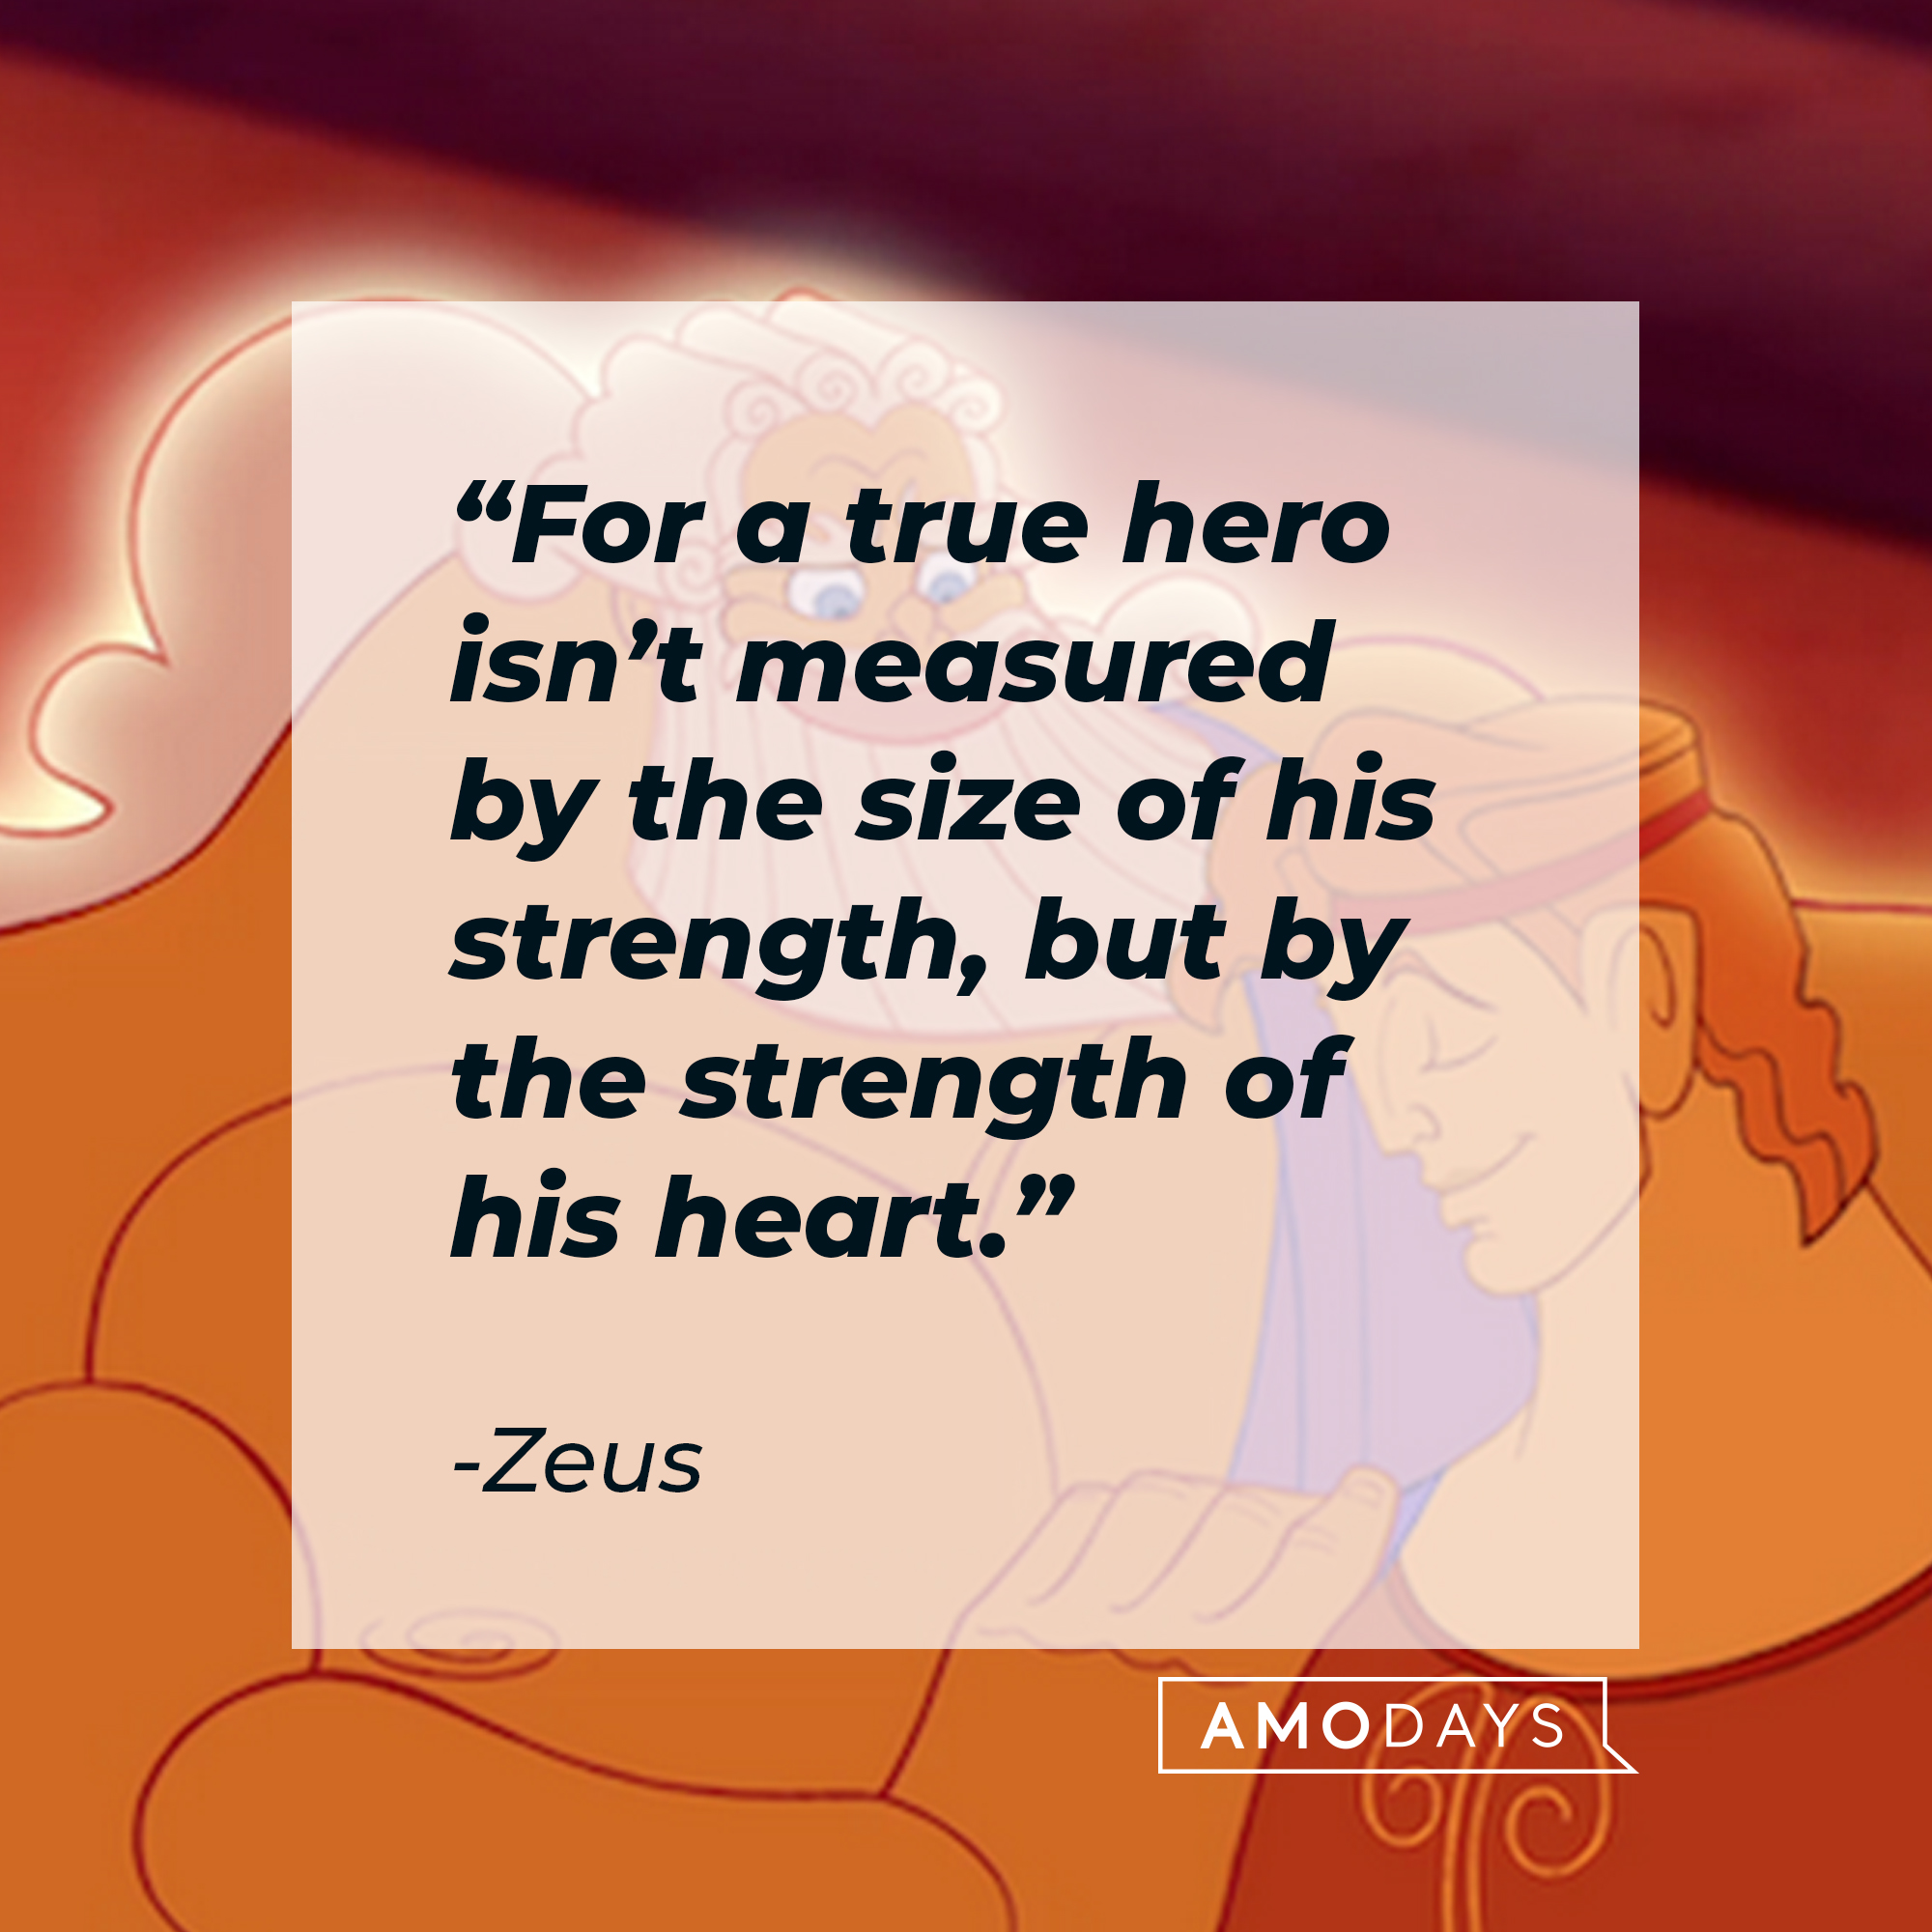 Zeus and Hercules from the movie "Hercules" with Zeus' quote: “For a true hero isn’t measured by the size of his strength, but by the strength of his heart.” | Source: Facebook.com/DisneyHercules